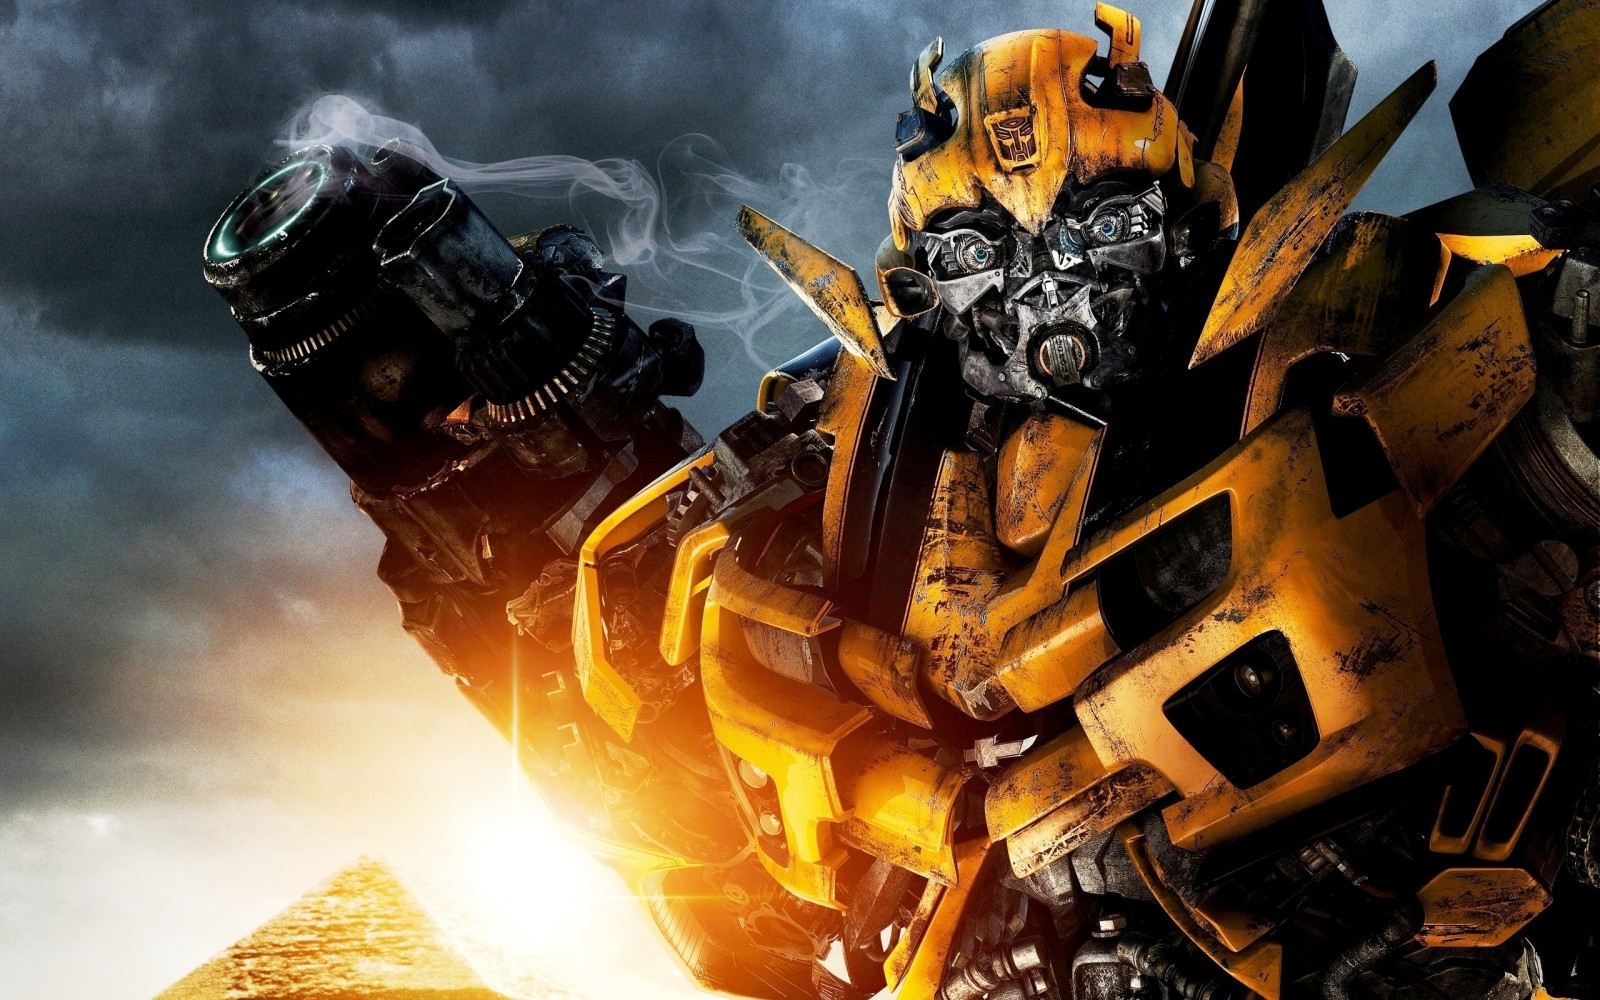 transformers hd wallpapers,action adventure game,mecha,transformers,games,fictional character